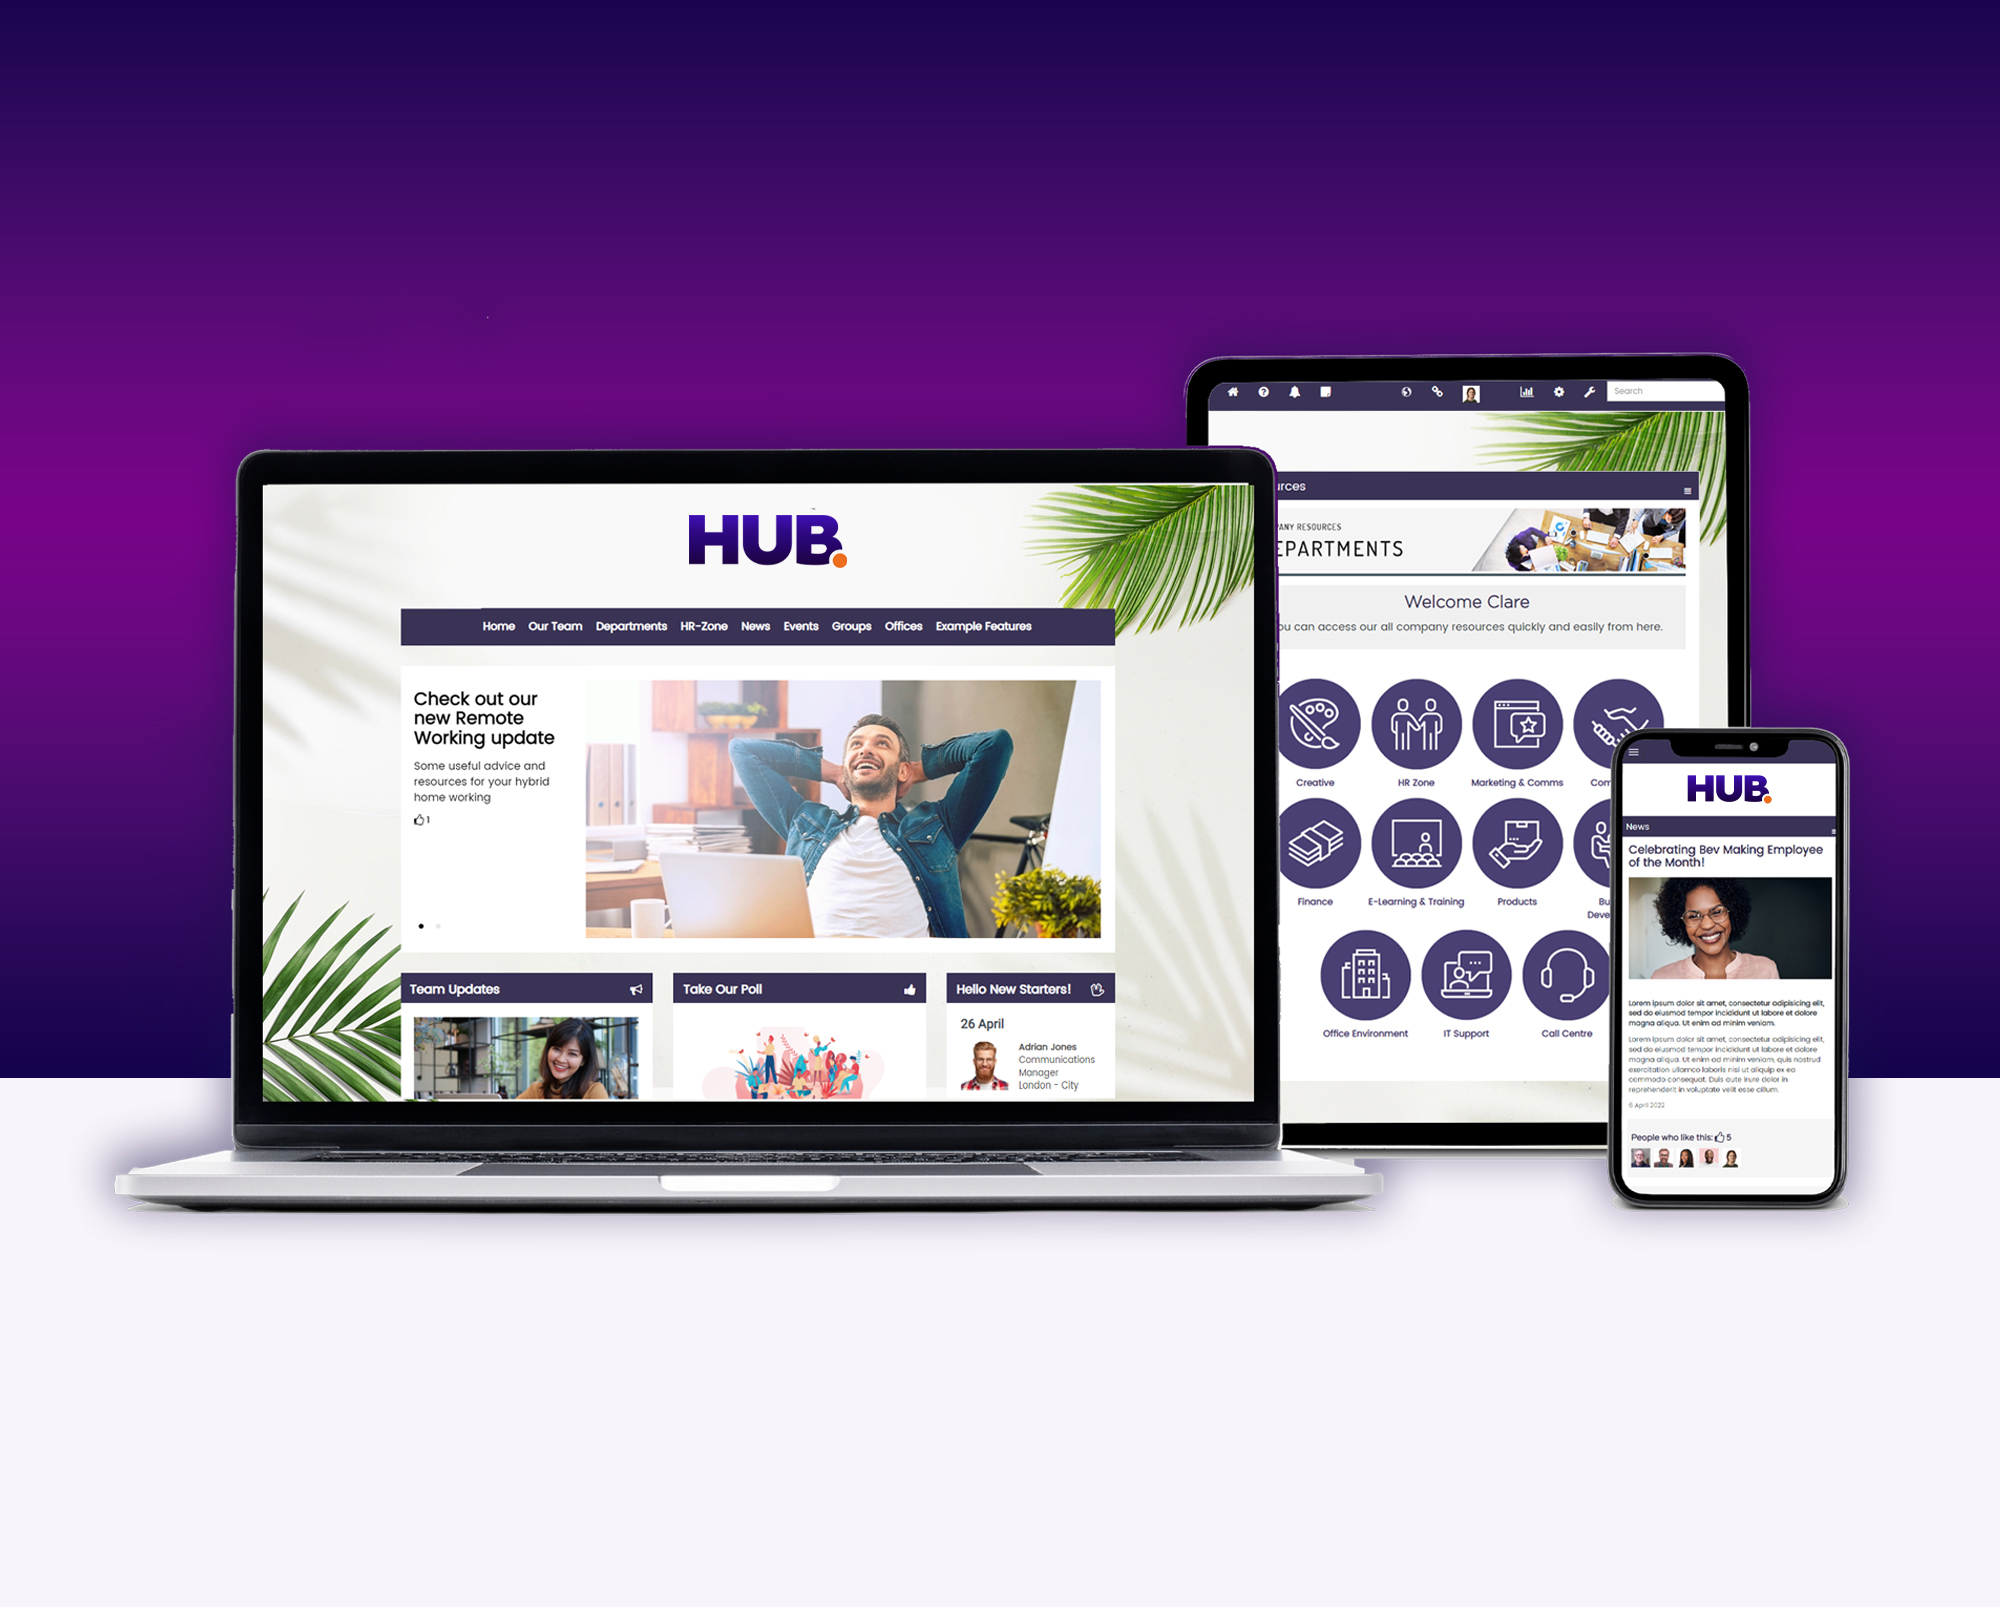 HUB is a fully responsive intranet, accessible across any device